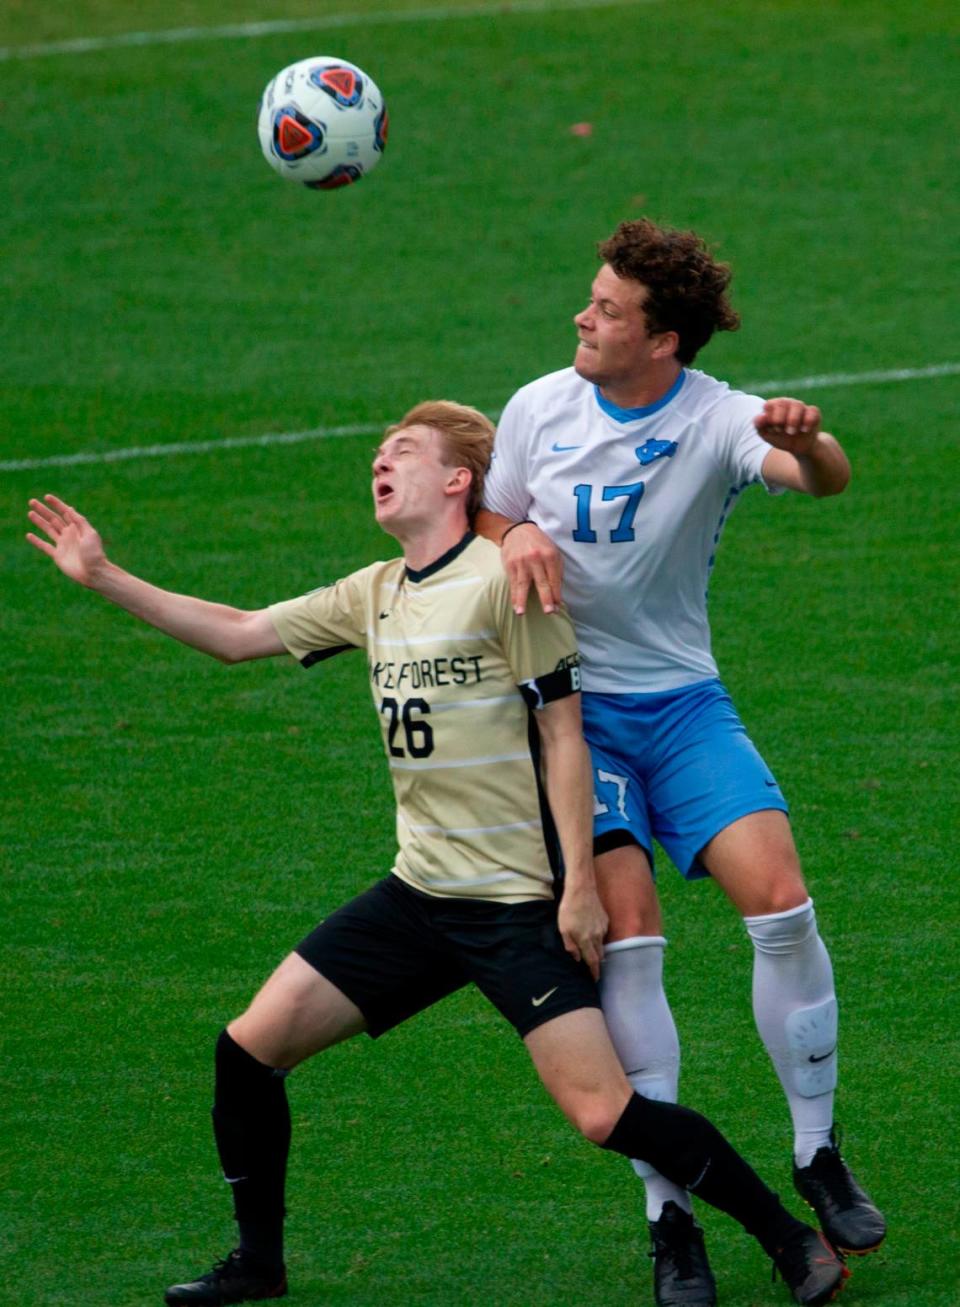 Wake Forest’s Colin Thomas (26) and UNC-Chapel Hill’s Cameron Fisher (17) battle for the ball during the Division I Men’s Soccer Championship quarterfinals at WakeMed Soccer Park in Cary Monday, May 10, 2021.